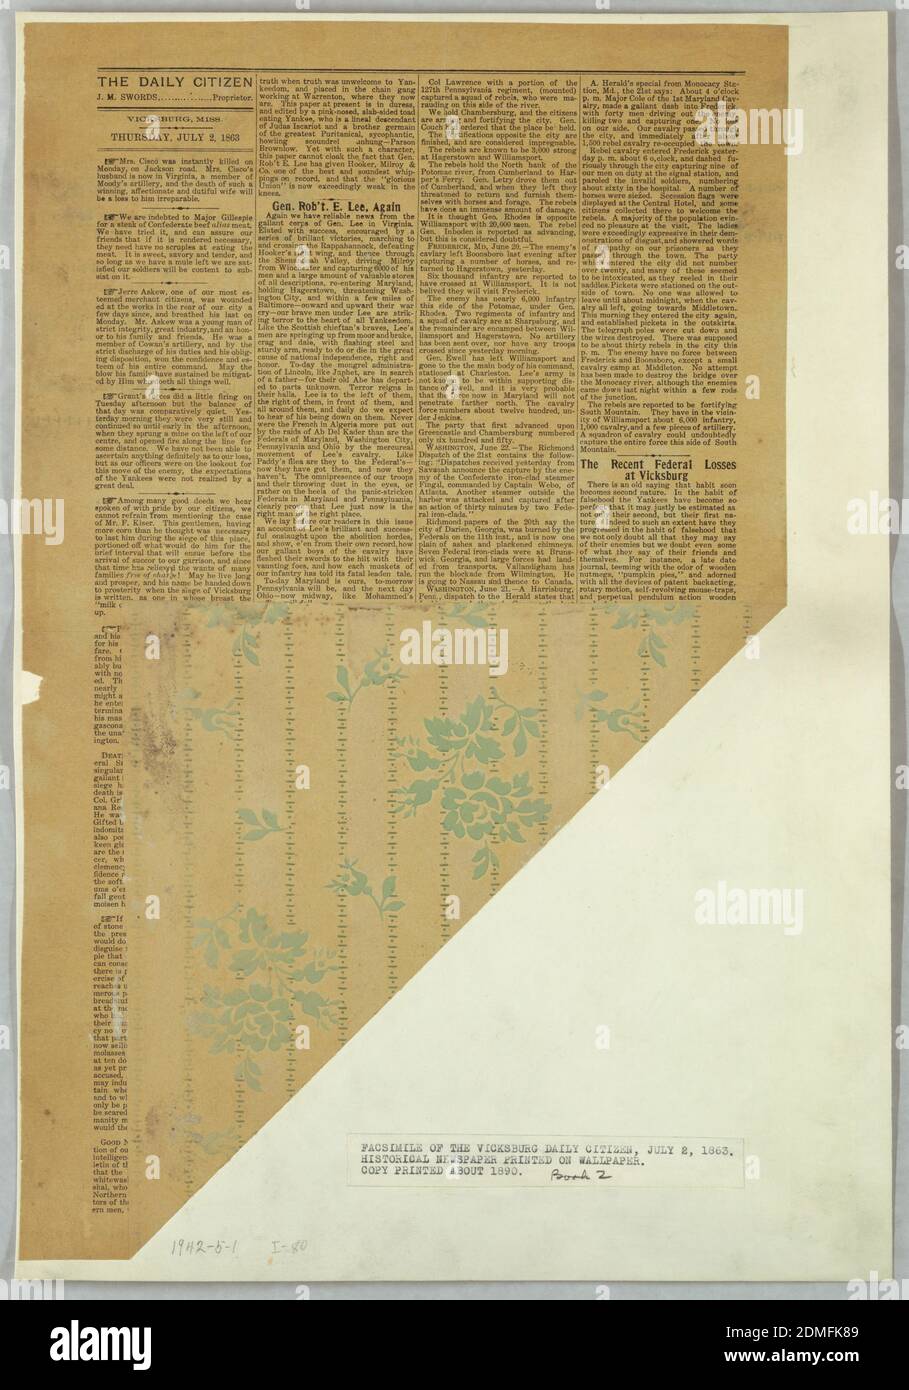 The Daily Citizen, Machine-printed, Reprint of 'The Daily Citizen', Vicksburg, Mississippi, July 2nd, 1863., USA, 1890–95, Wallcoverings, Sidewall, Sidewall Stock Photo